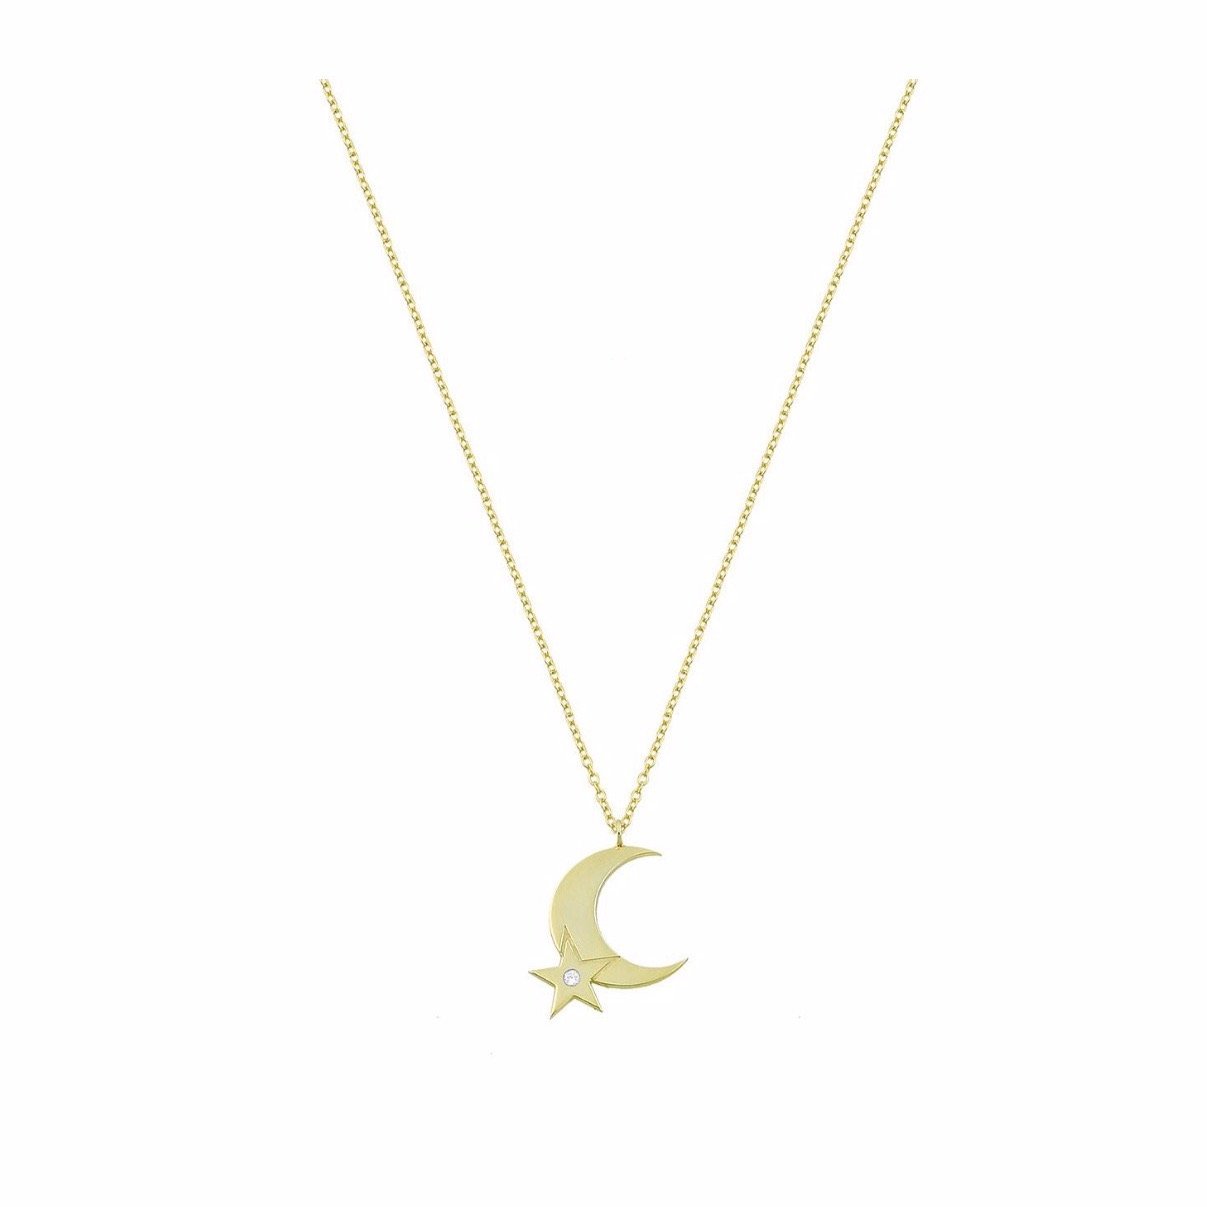 Half Moon & Star Necklace JEWELRY The Sis Kiss